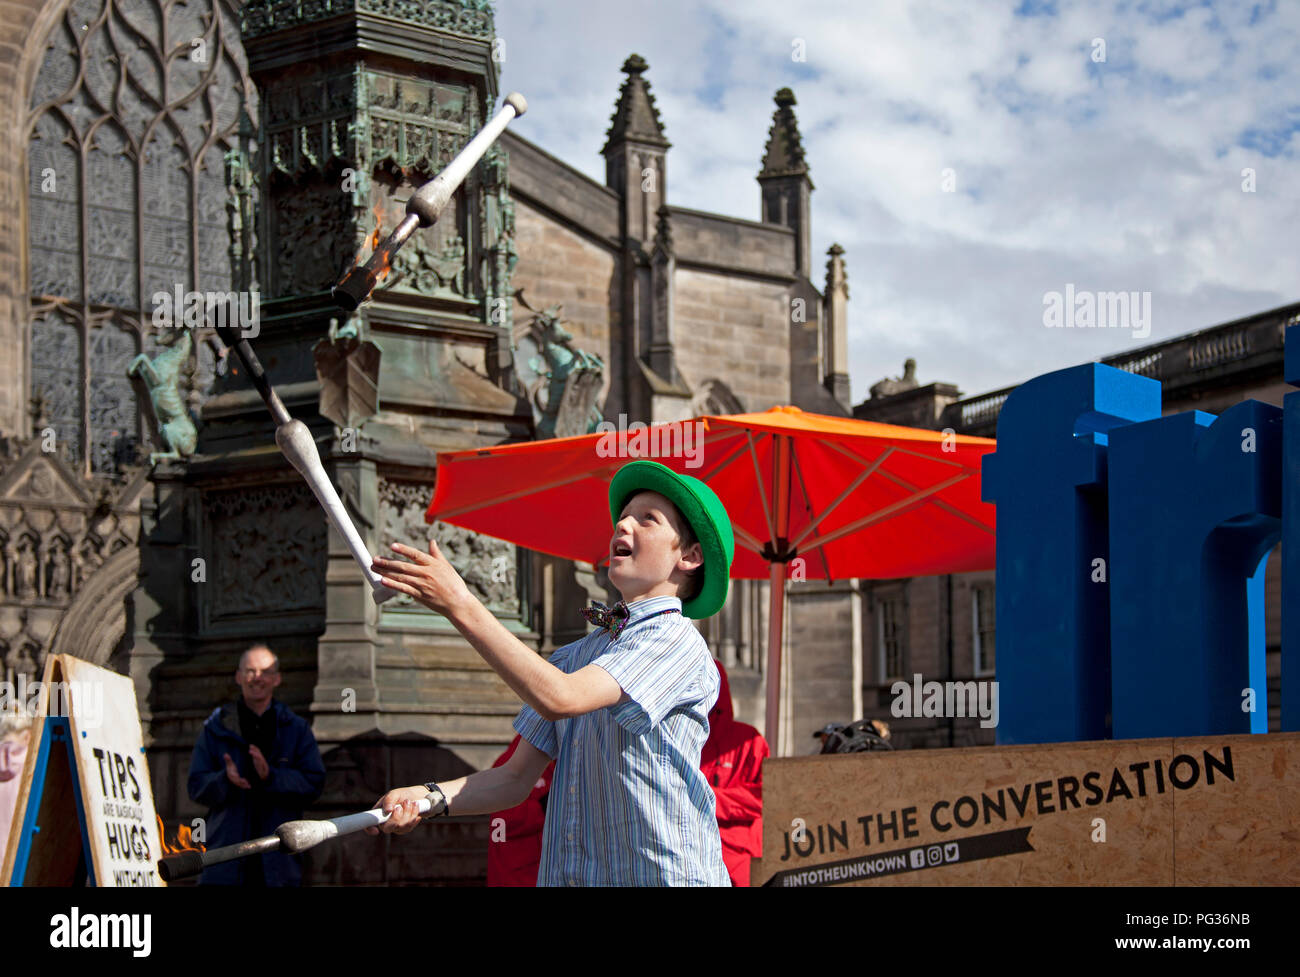 Edinburgh, Scotland, UK 23 August 2018. Edinburgh Fringe Festival, Royal Mile, 12 year old Patrick from Edinburgh plays with fire with his juggling act appearing at his first Fringe as a busker Stock Photo